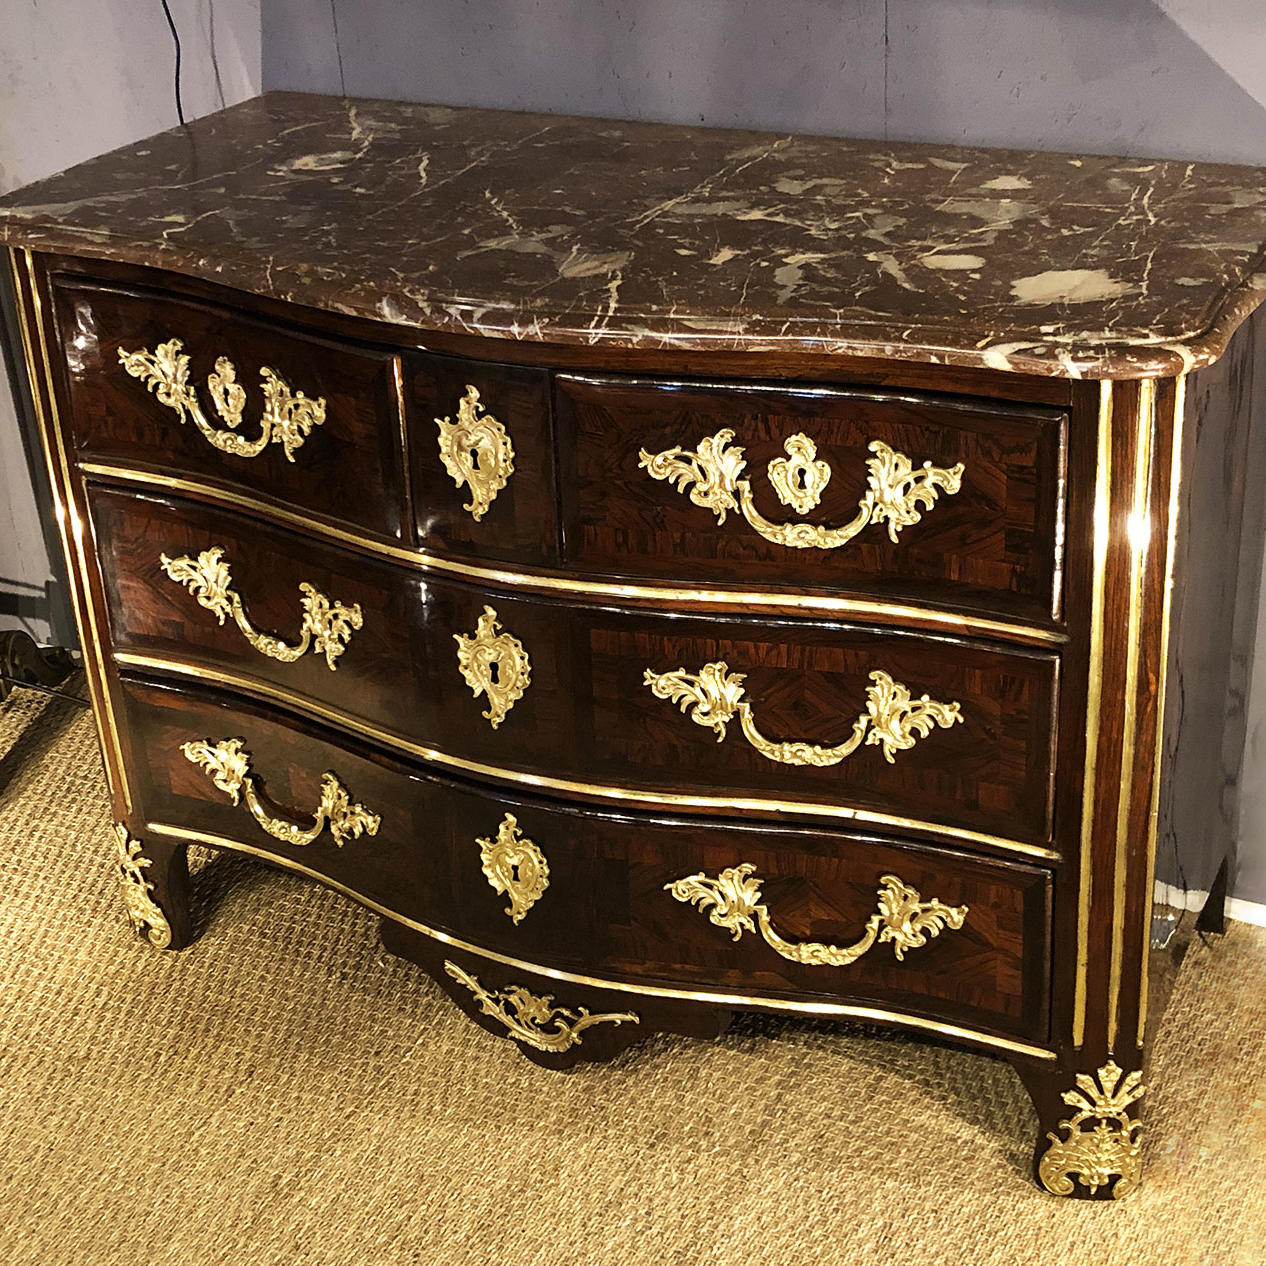 Regency Chest of Drawers, 18th Century